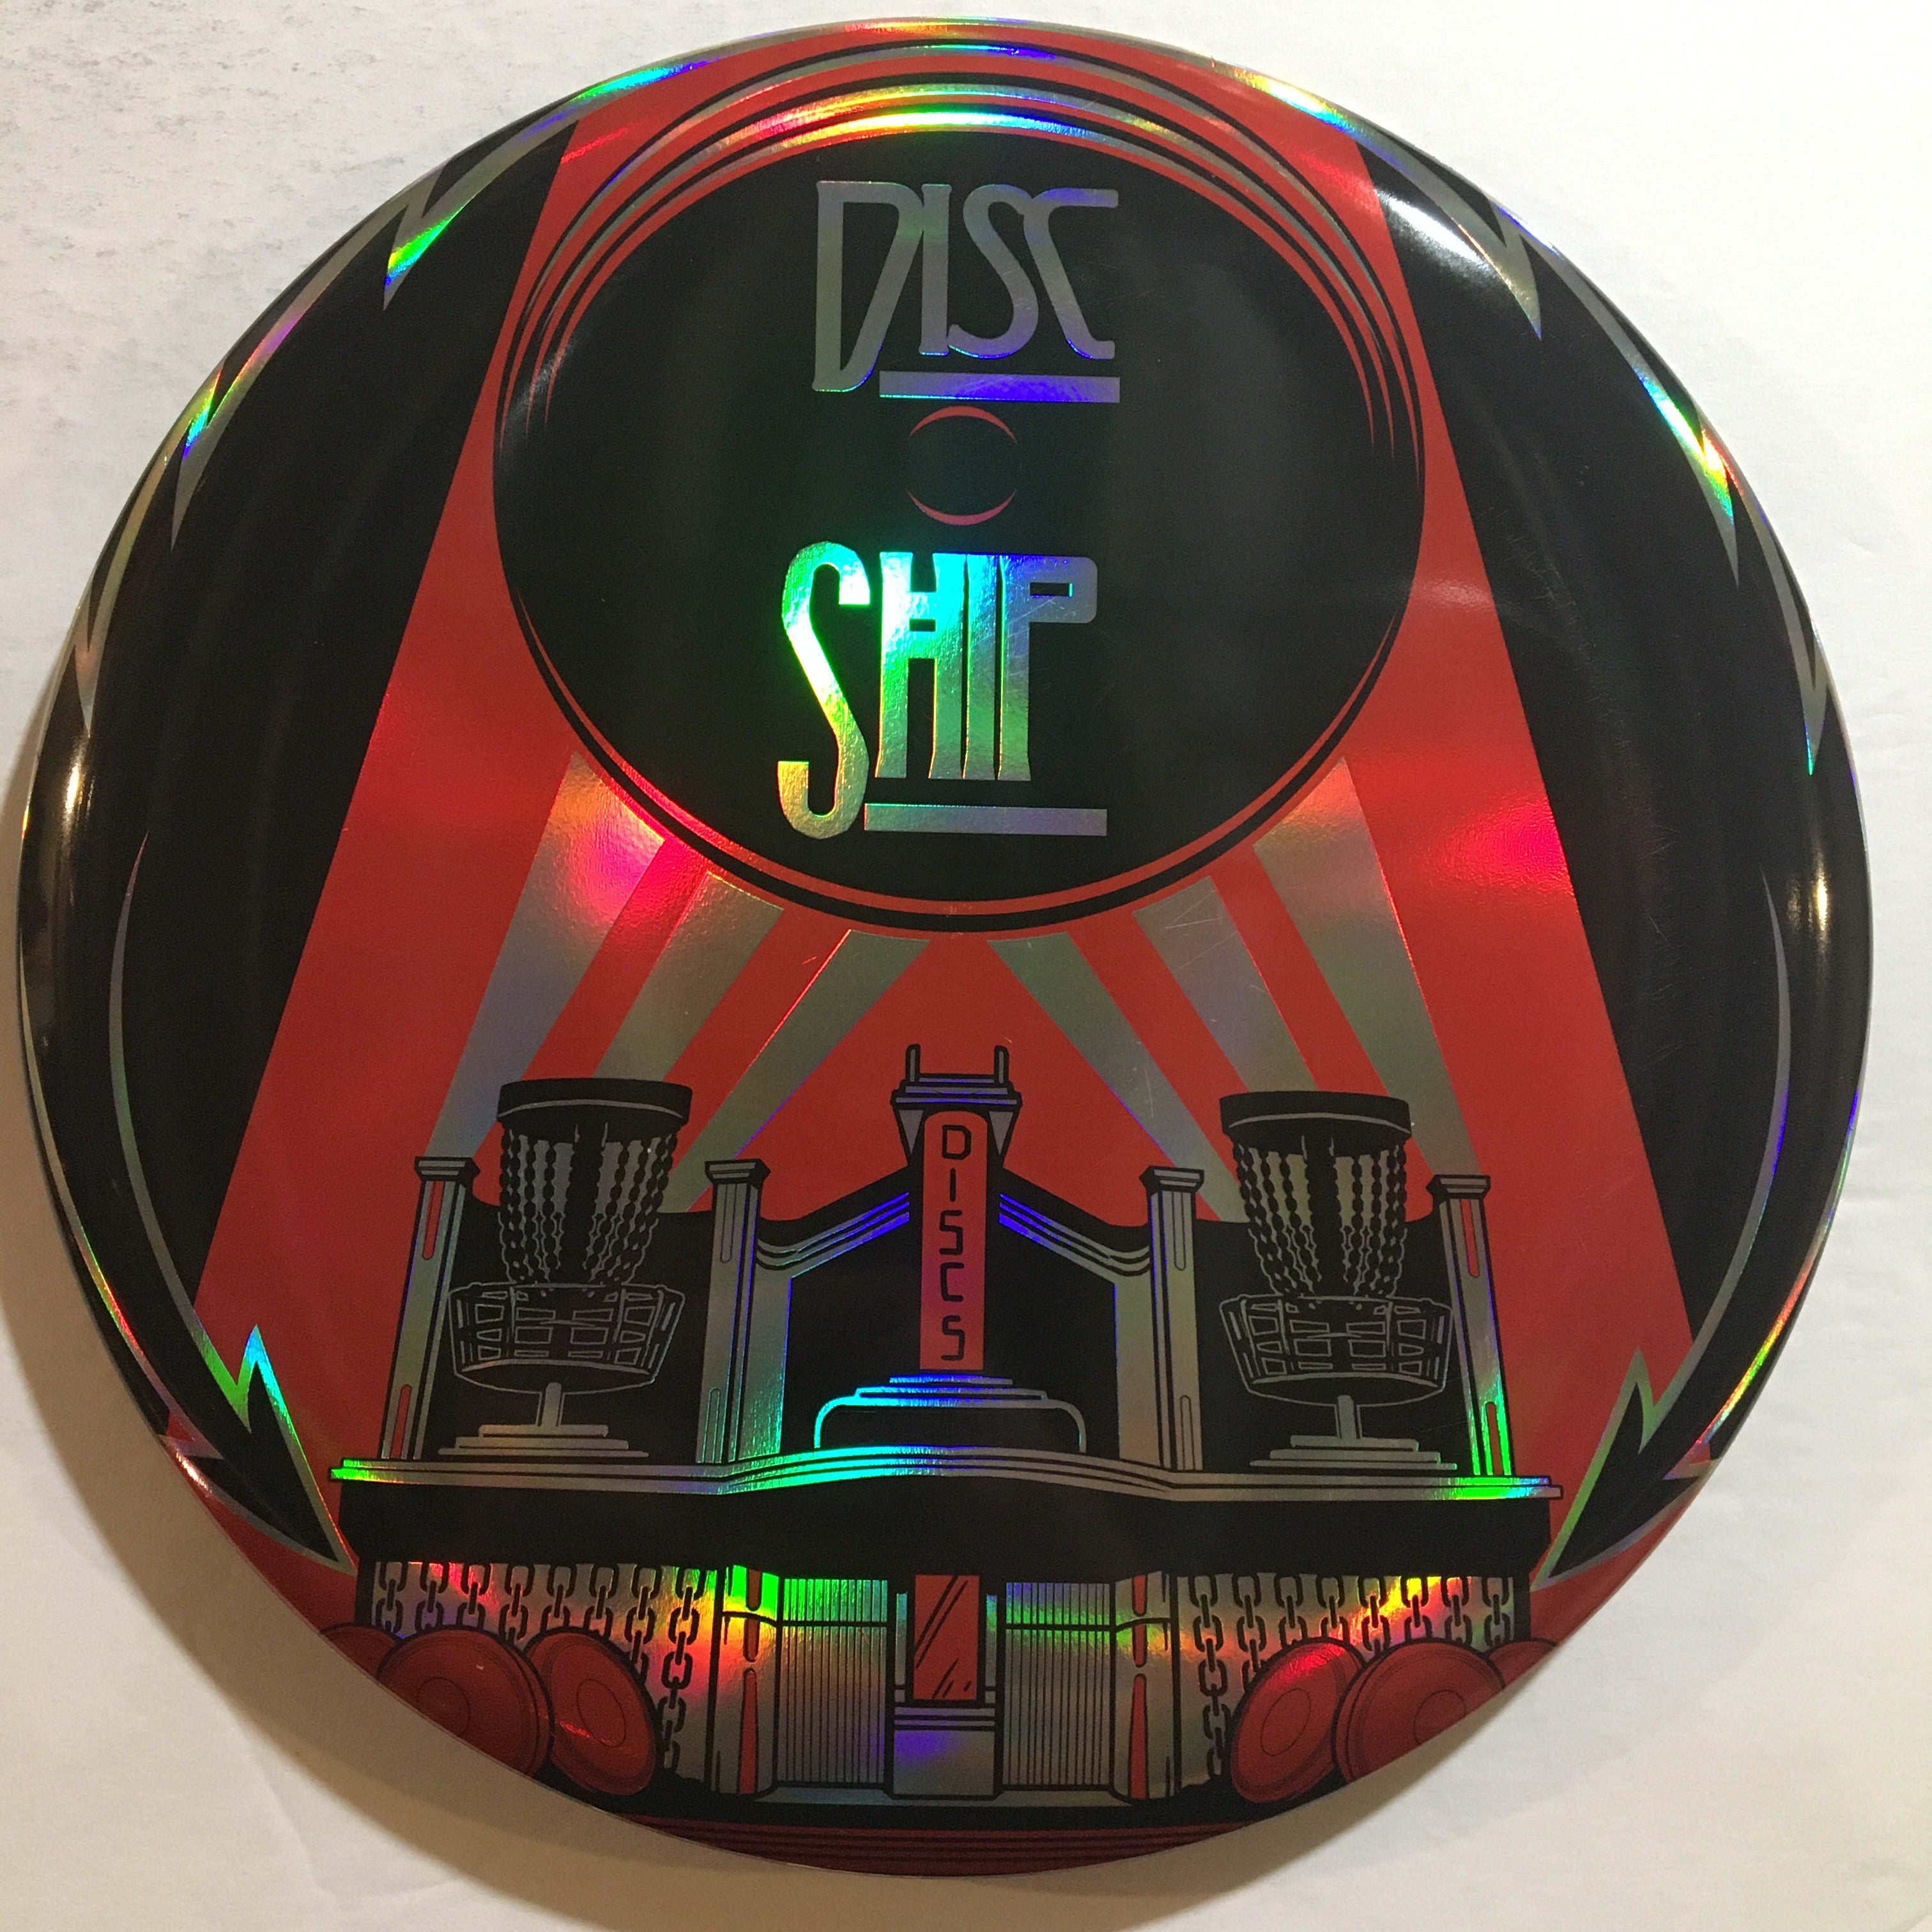 Buzzz Full Foil (Disc Ship) LIMITED EDITION